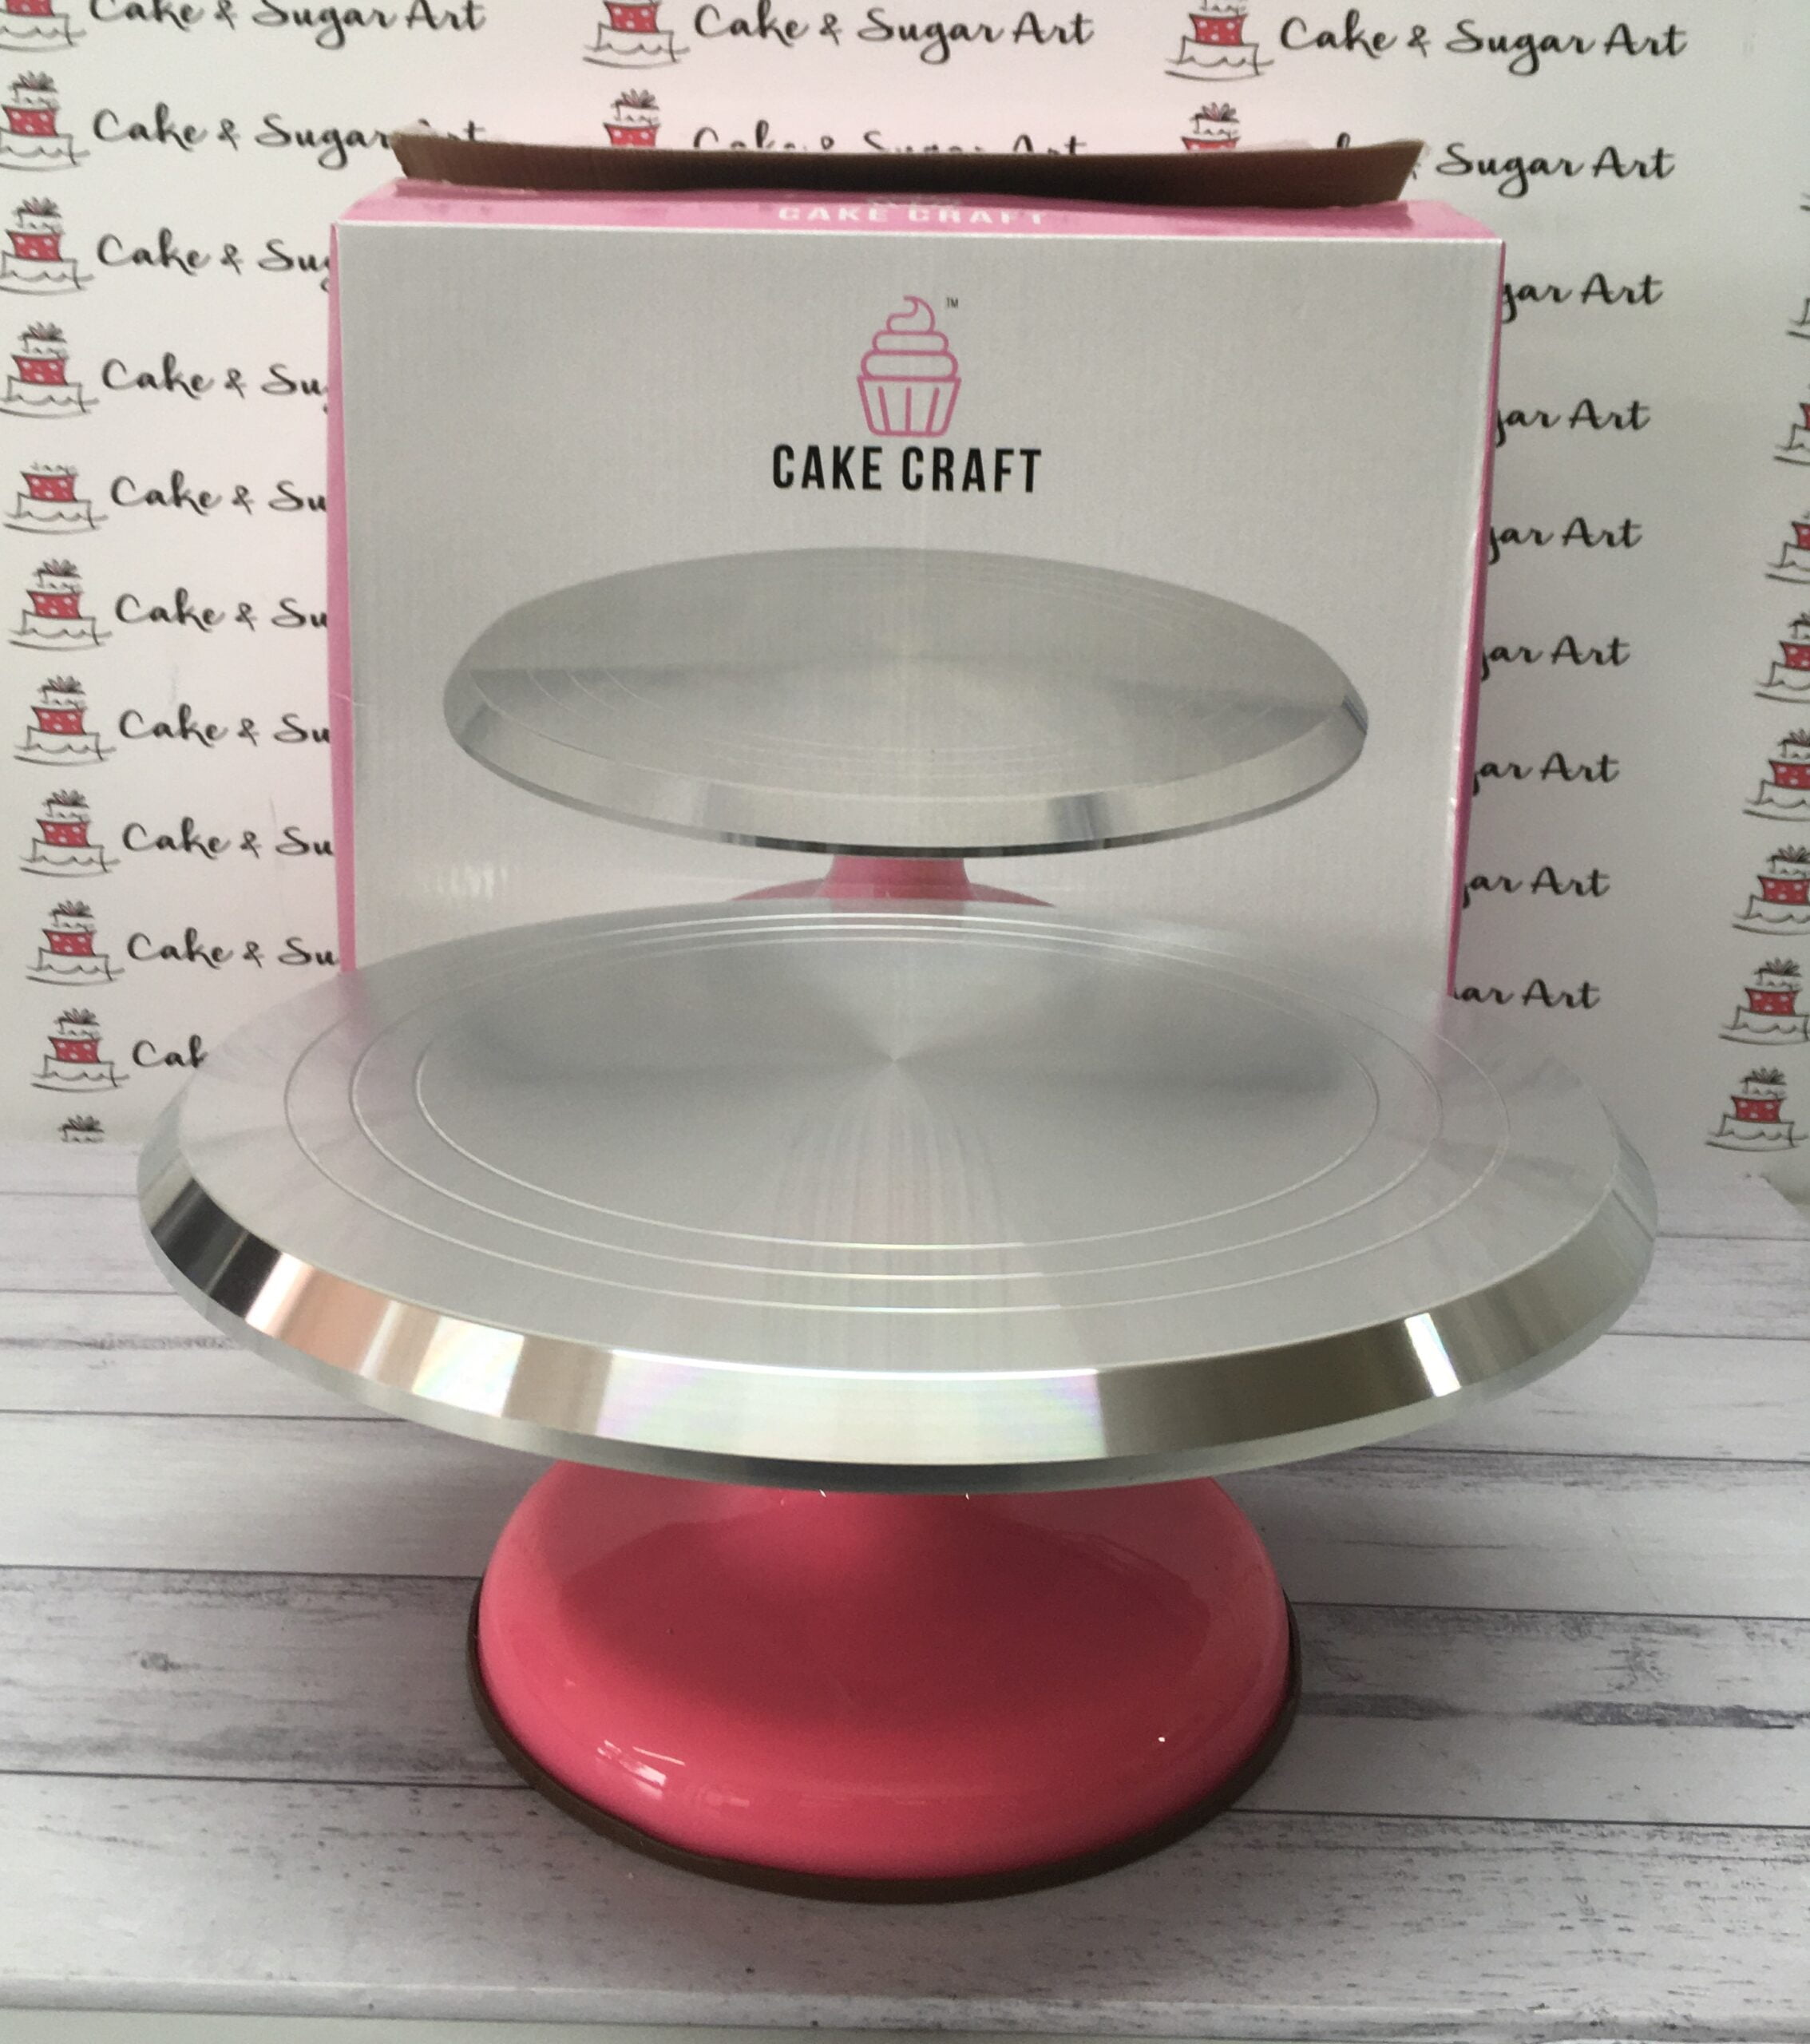 Cake Stand Decorating Turntable Rotating Stainless Steel 320mm Dia 75mm  High - Total Food Equipment NZ